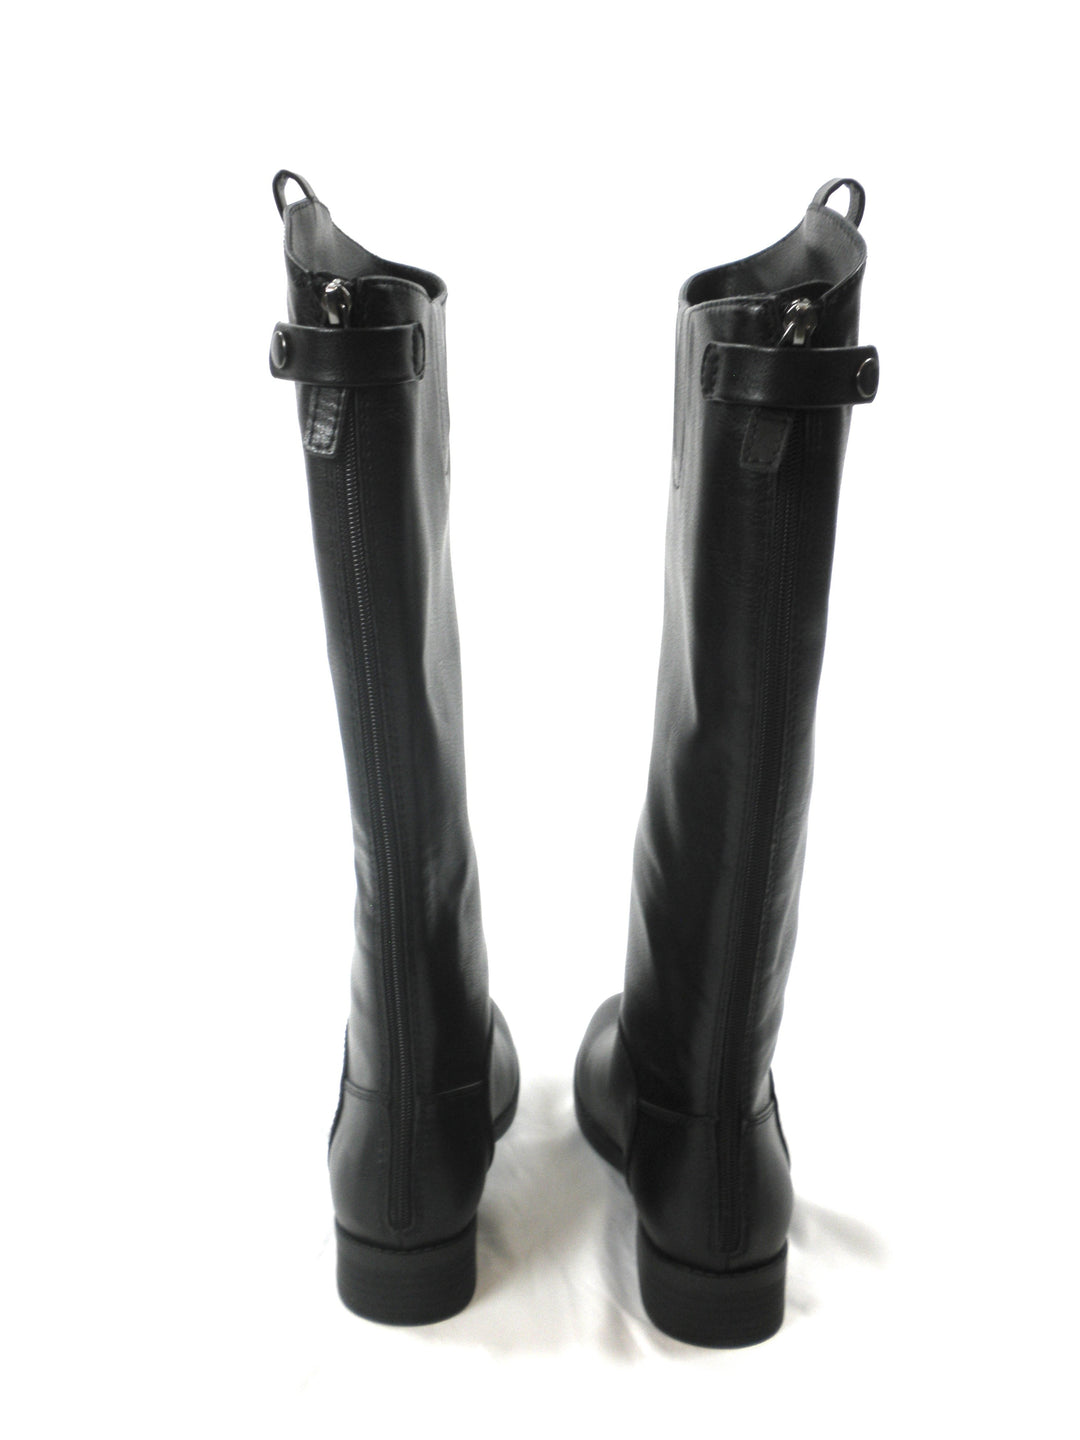 Amazon Essentials Black Faux Leather Boots - Size 8 - The Fashion Foundation